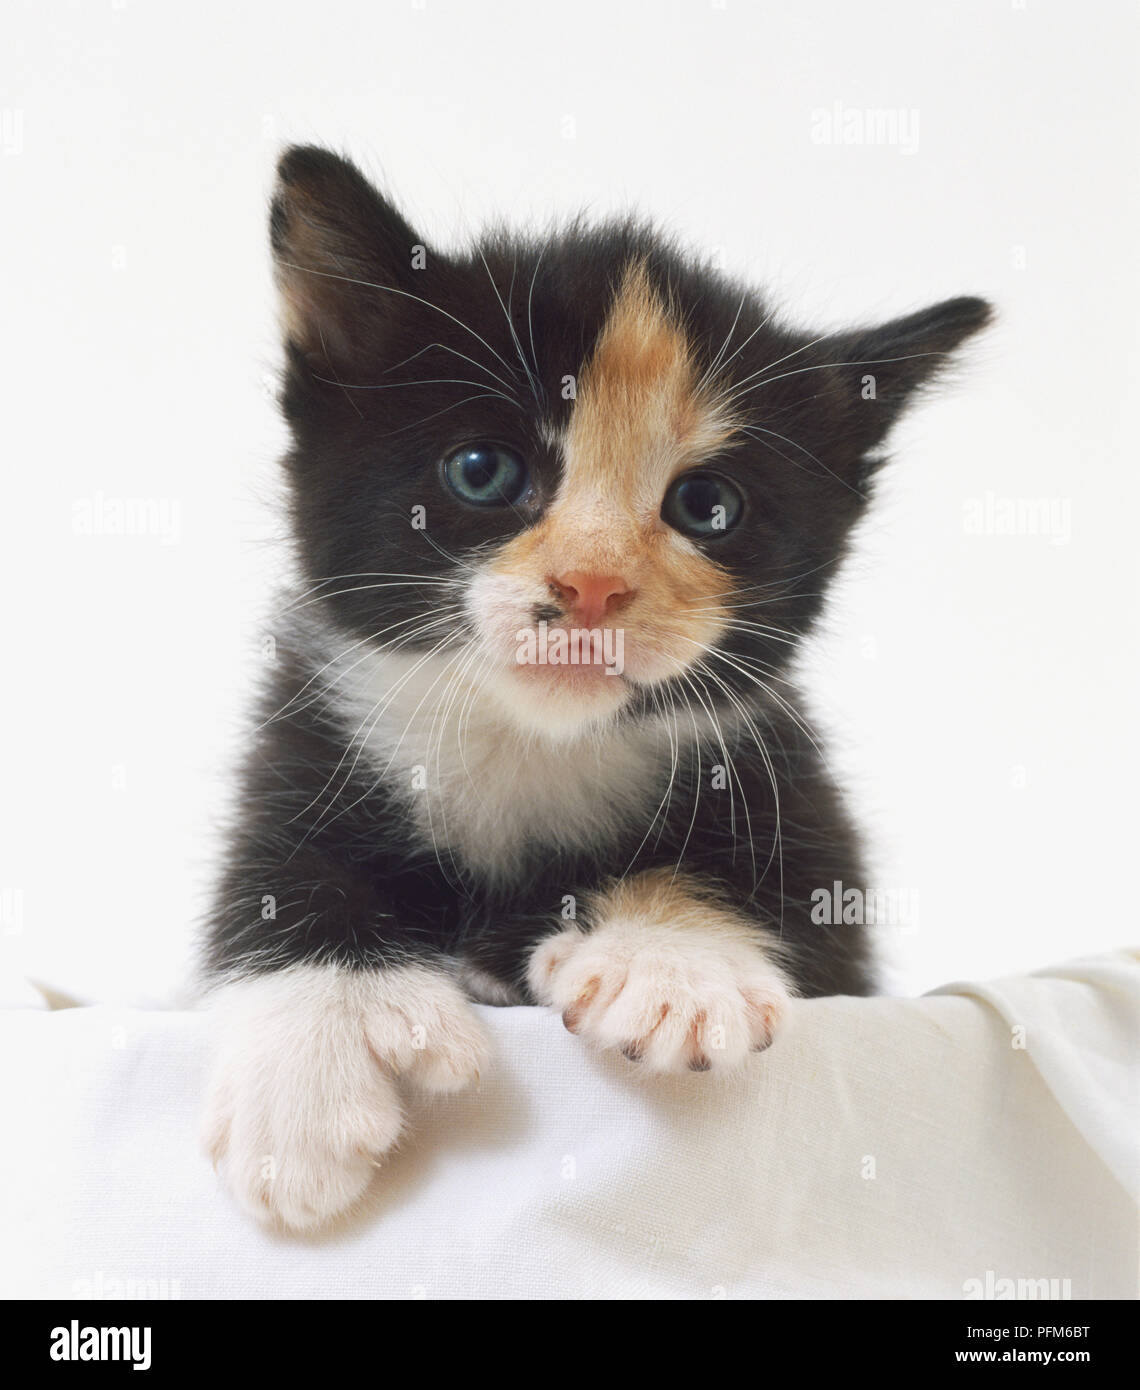 A black and white cat seen from the front. Stock Photo